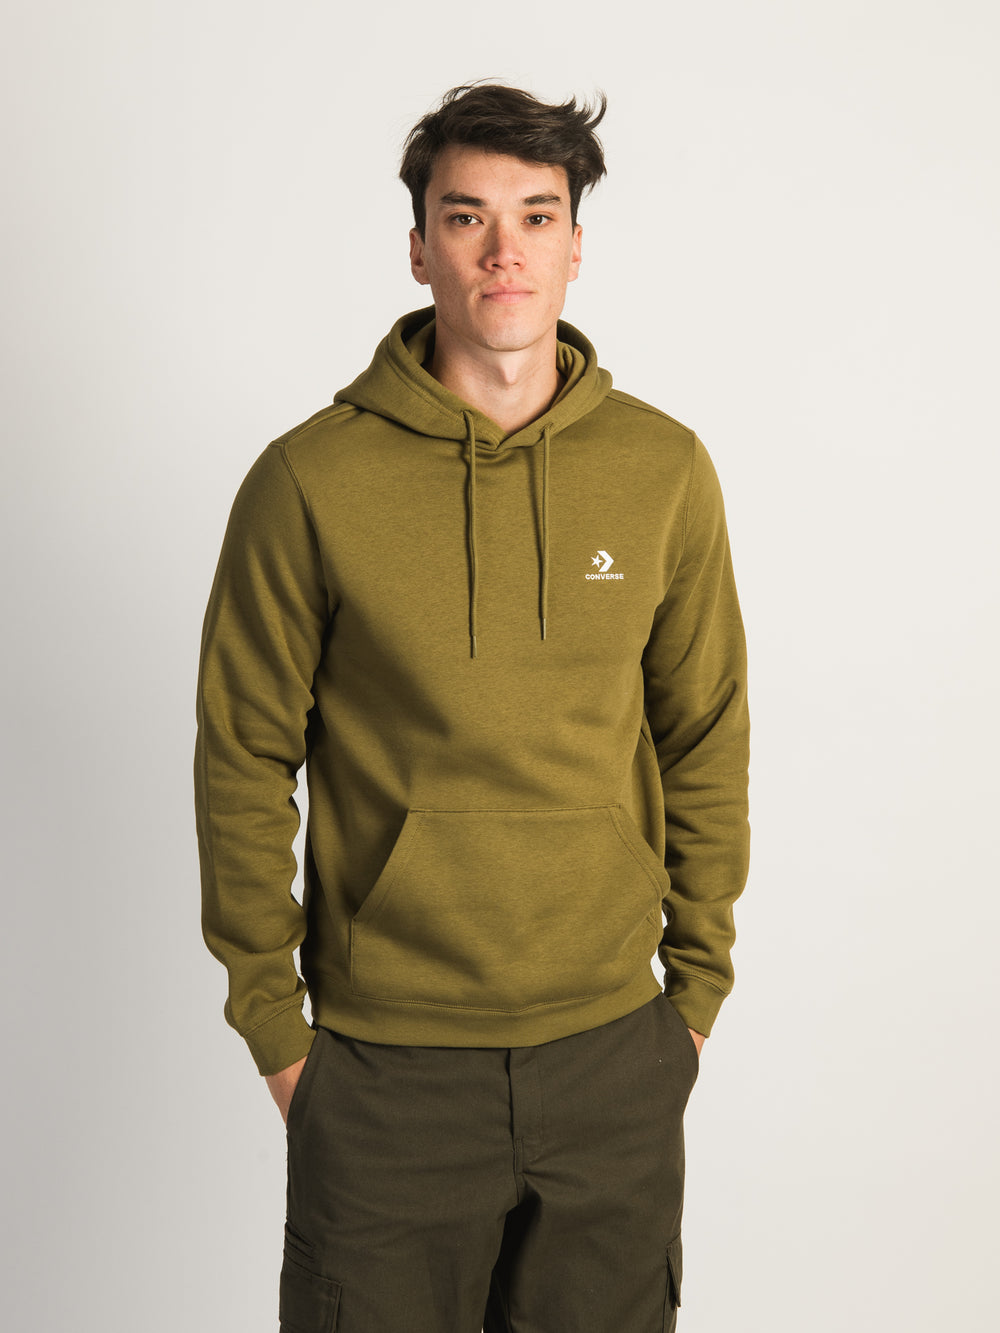 CONVERSE CHEVRON STAR PULL OVER HOODIE